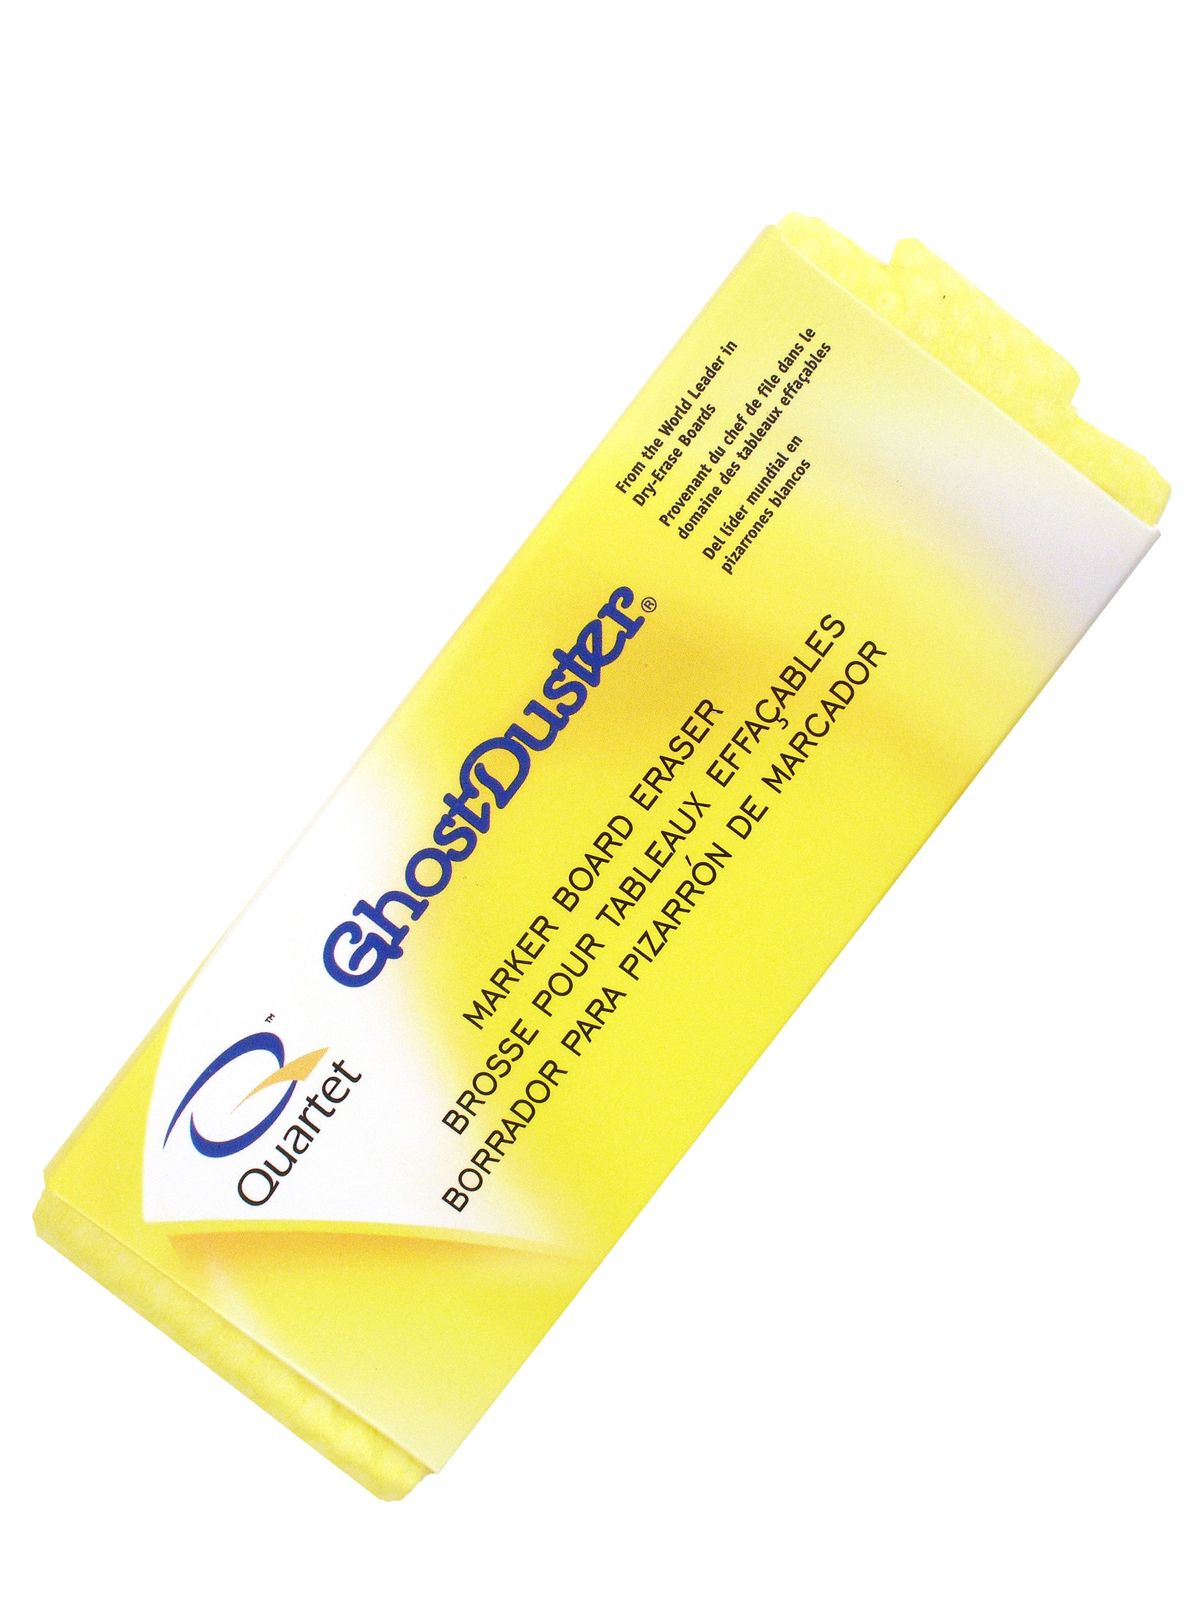 Ghostduster Eraser Dry Eraser With 16 Disposable Pads